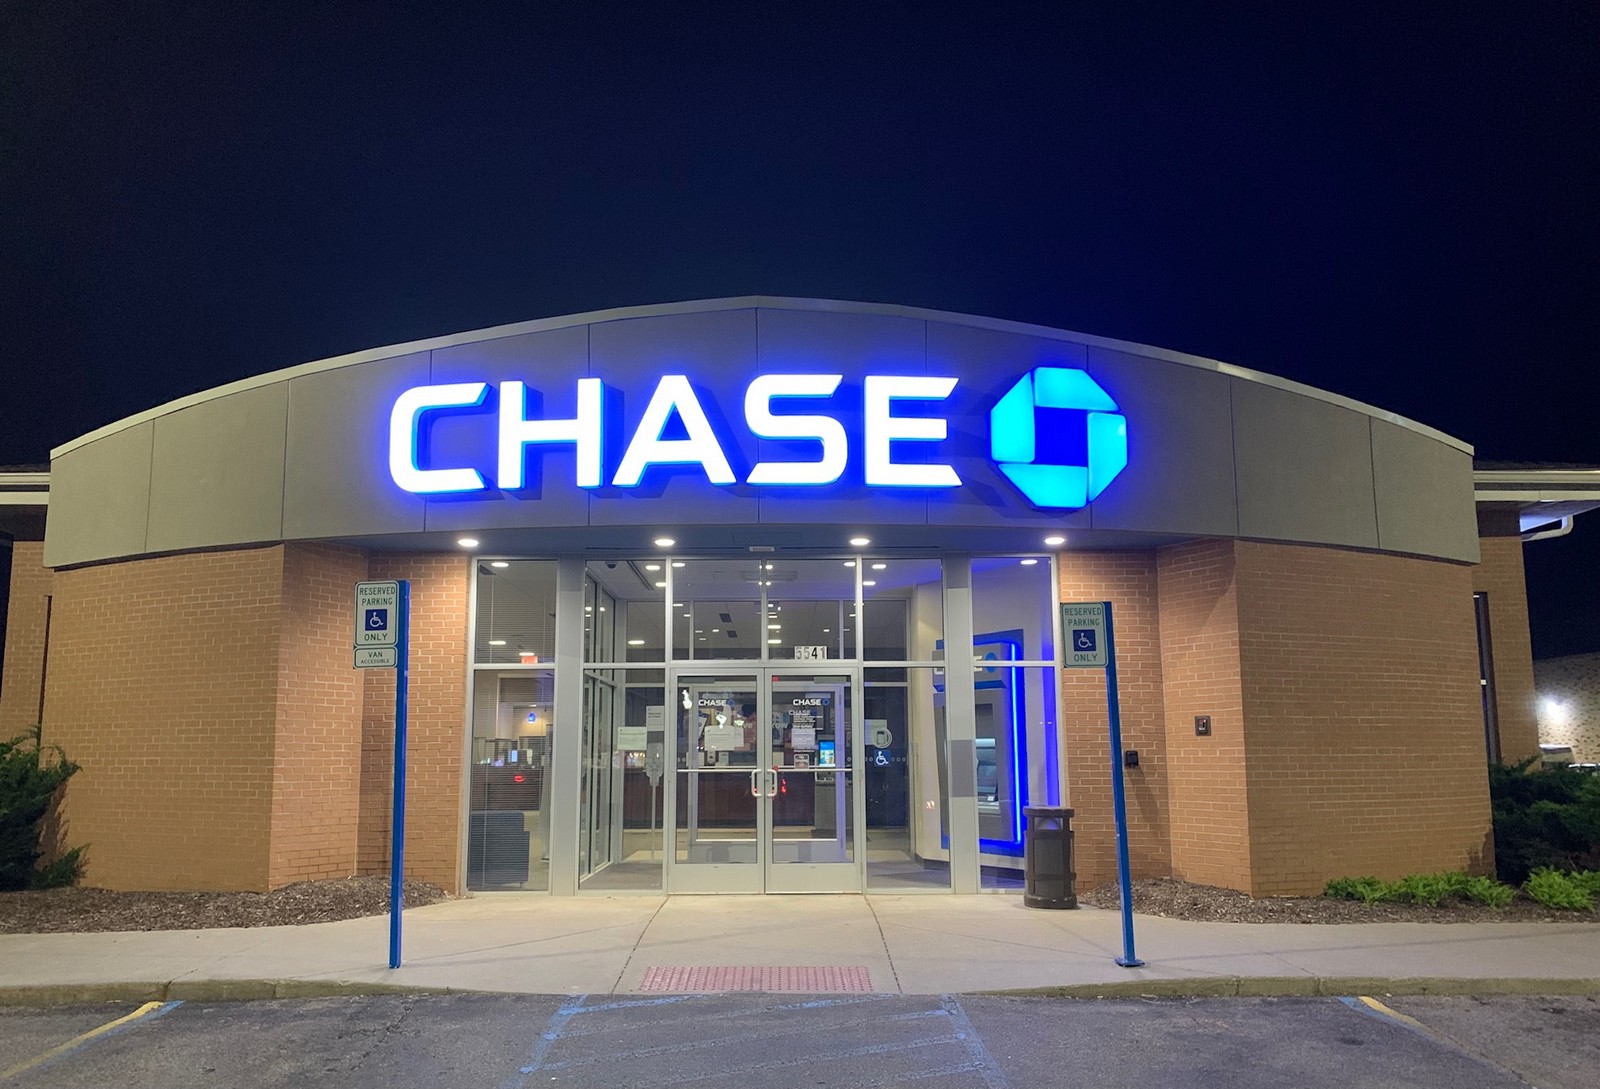 Old Chase Freedom product change